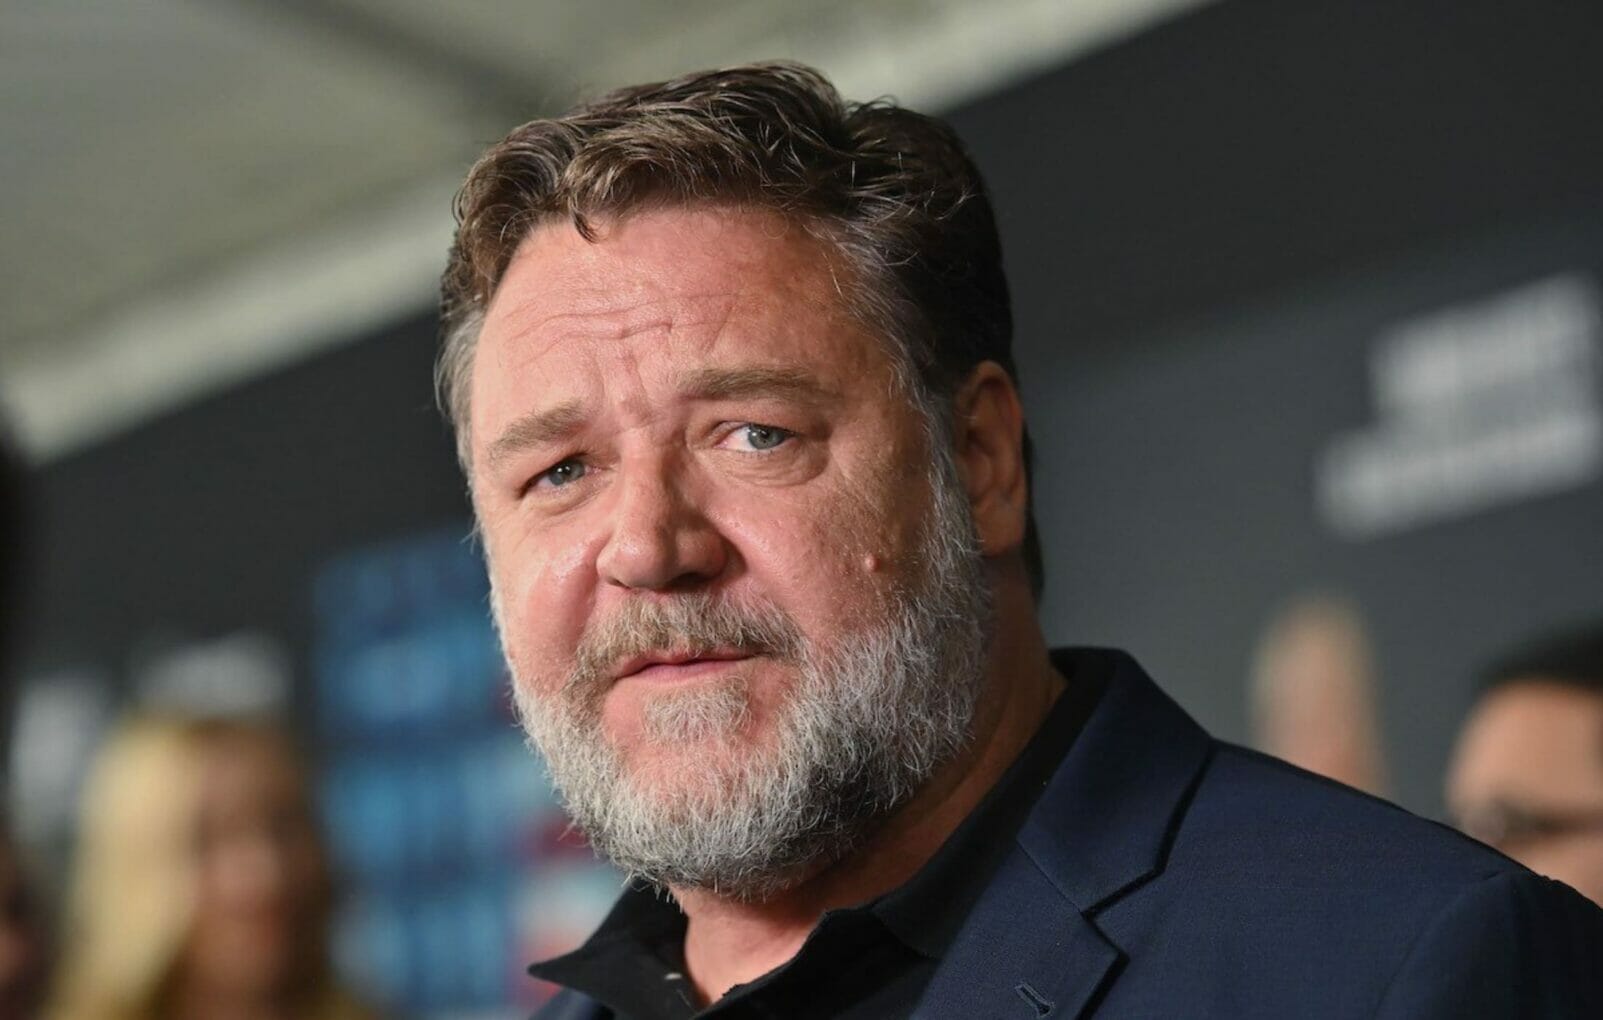 Russell Crowe bio net worth, age, height, weight, wife, kids, wiki